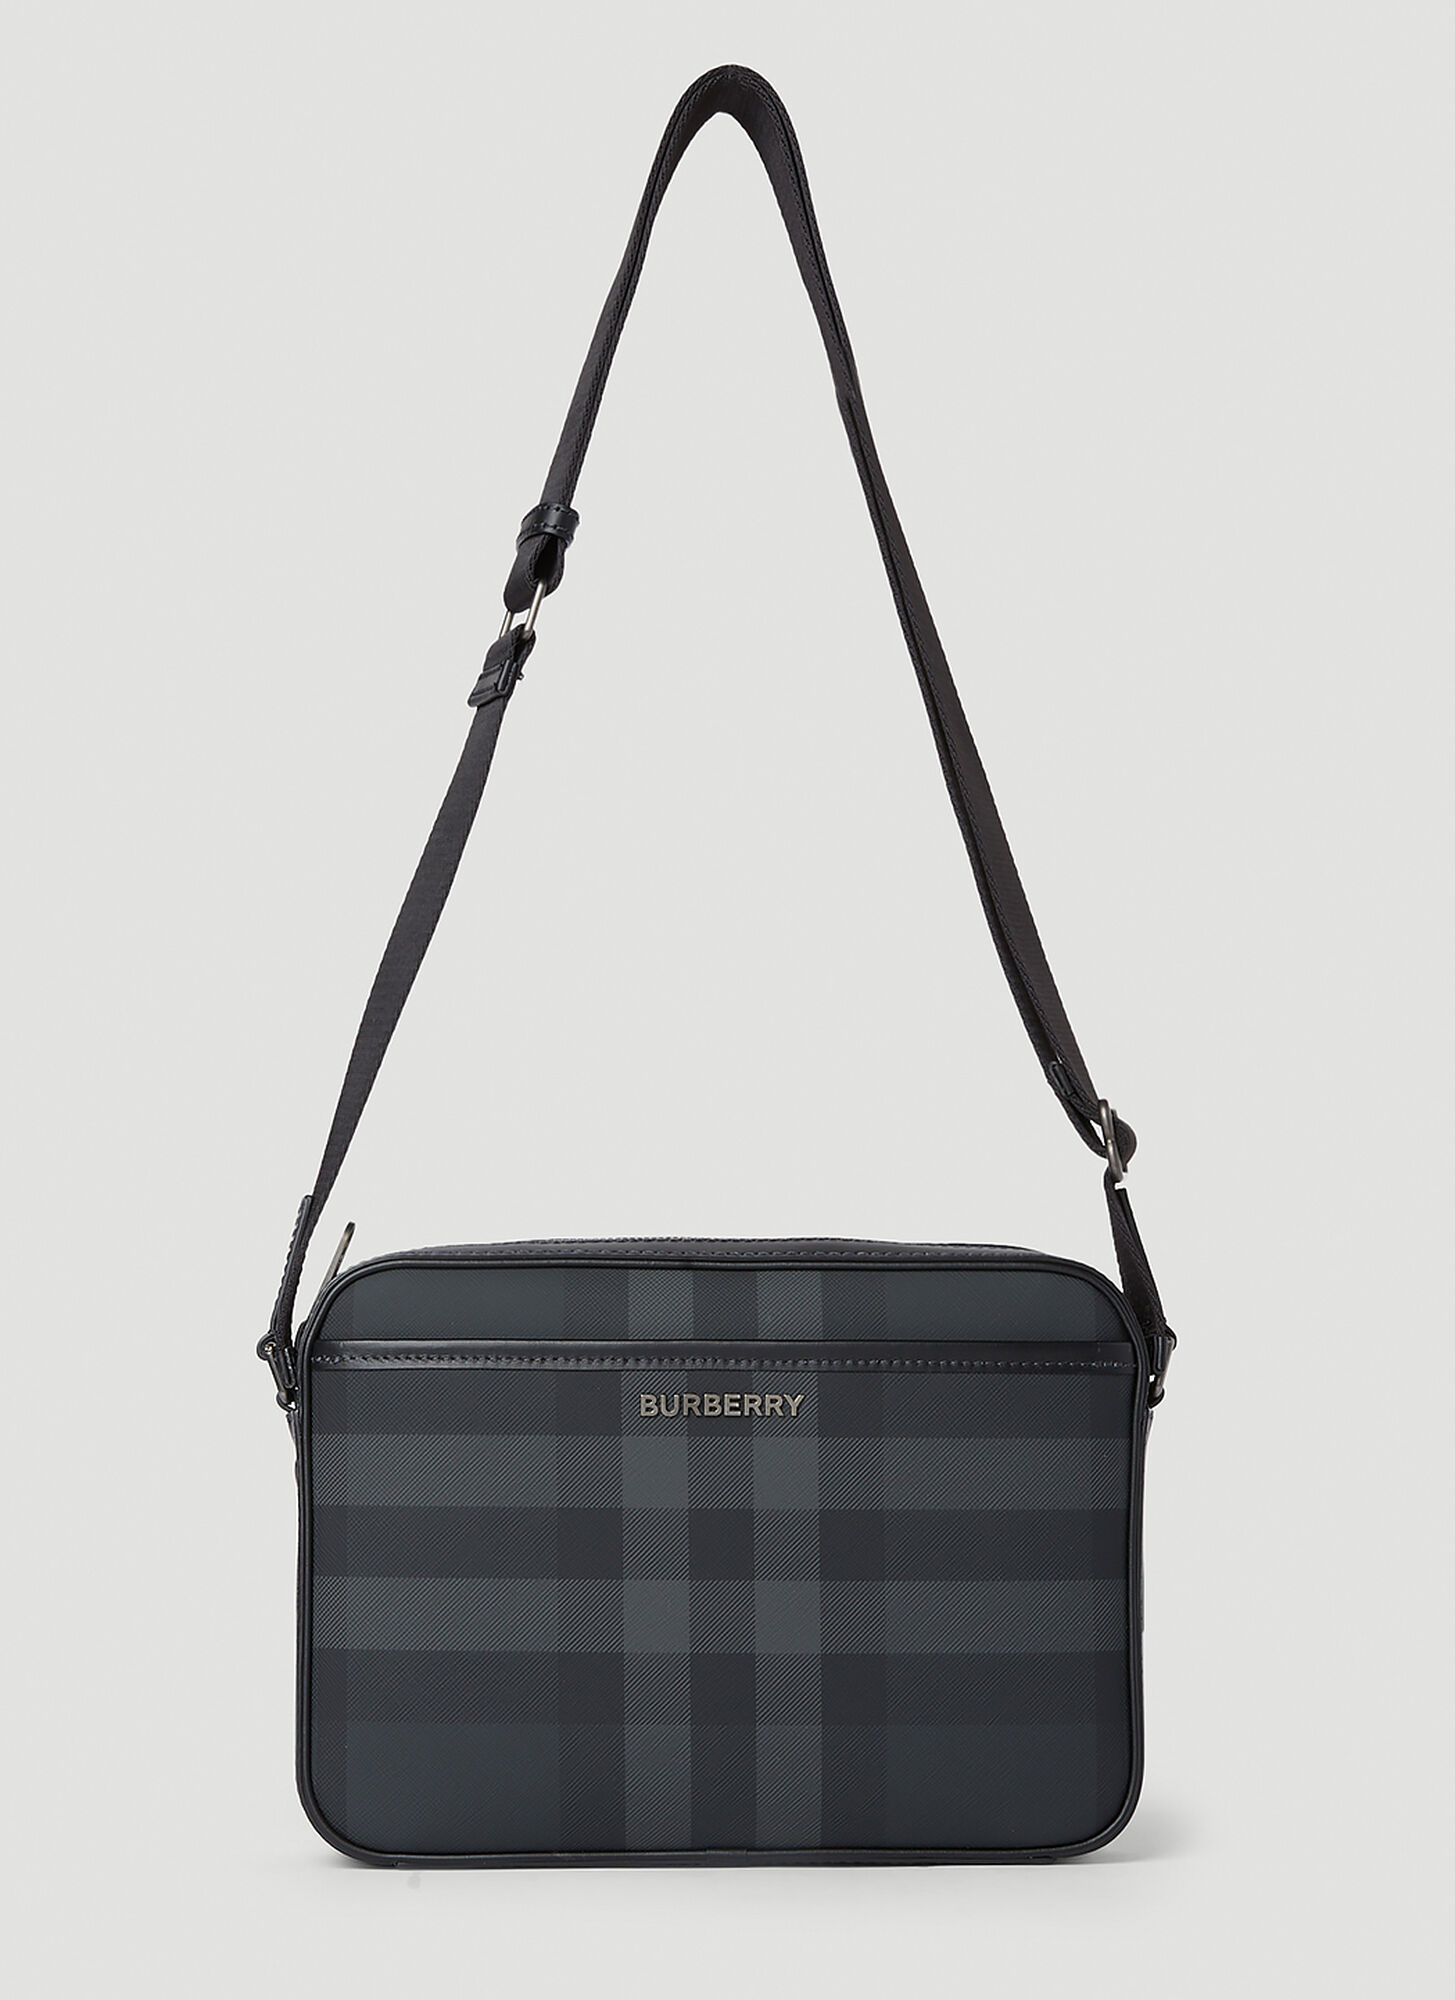 Burberry Muswell Shoulder Bag In Black